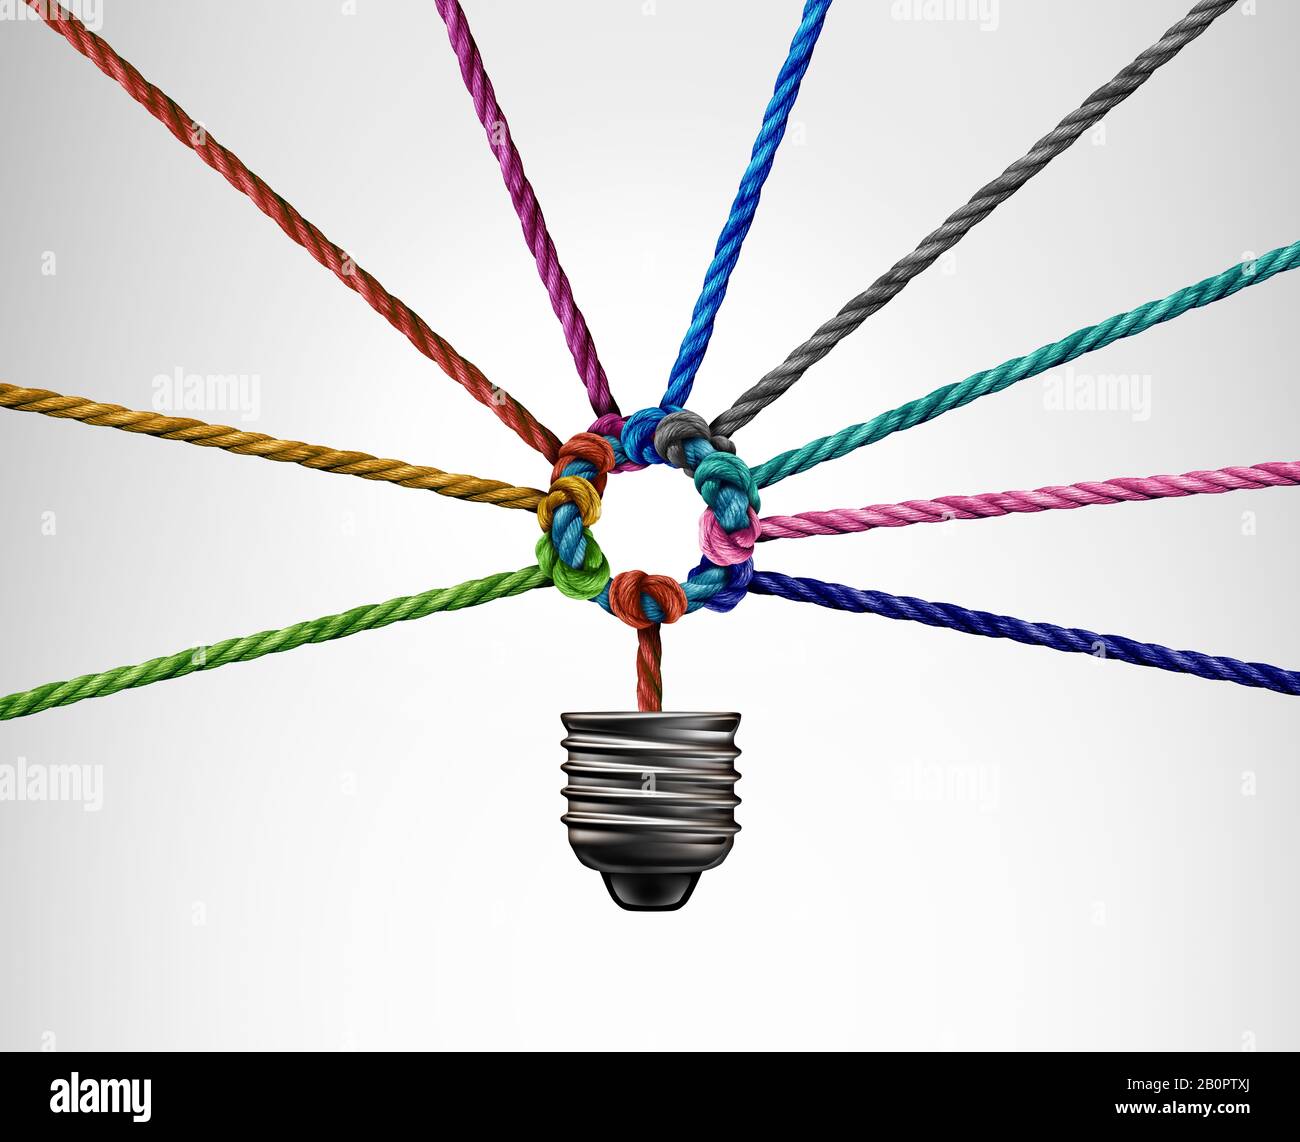 Creative network idea as a linked light bulb and connected creativity lightbulb concept with 3D illustration elements. Stock Photo